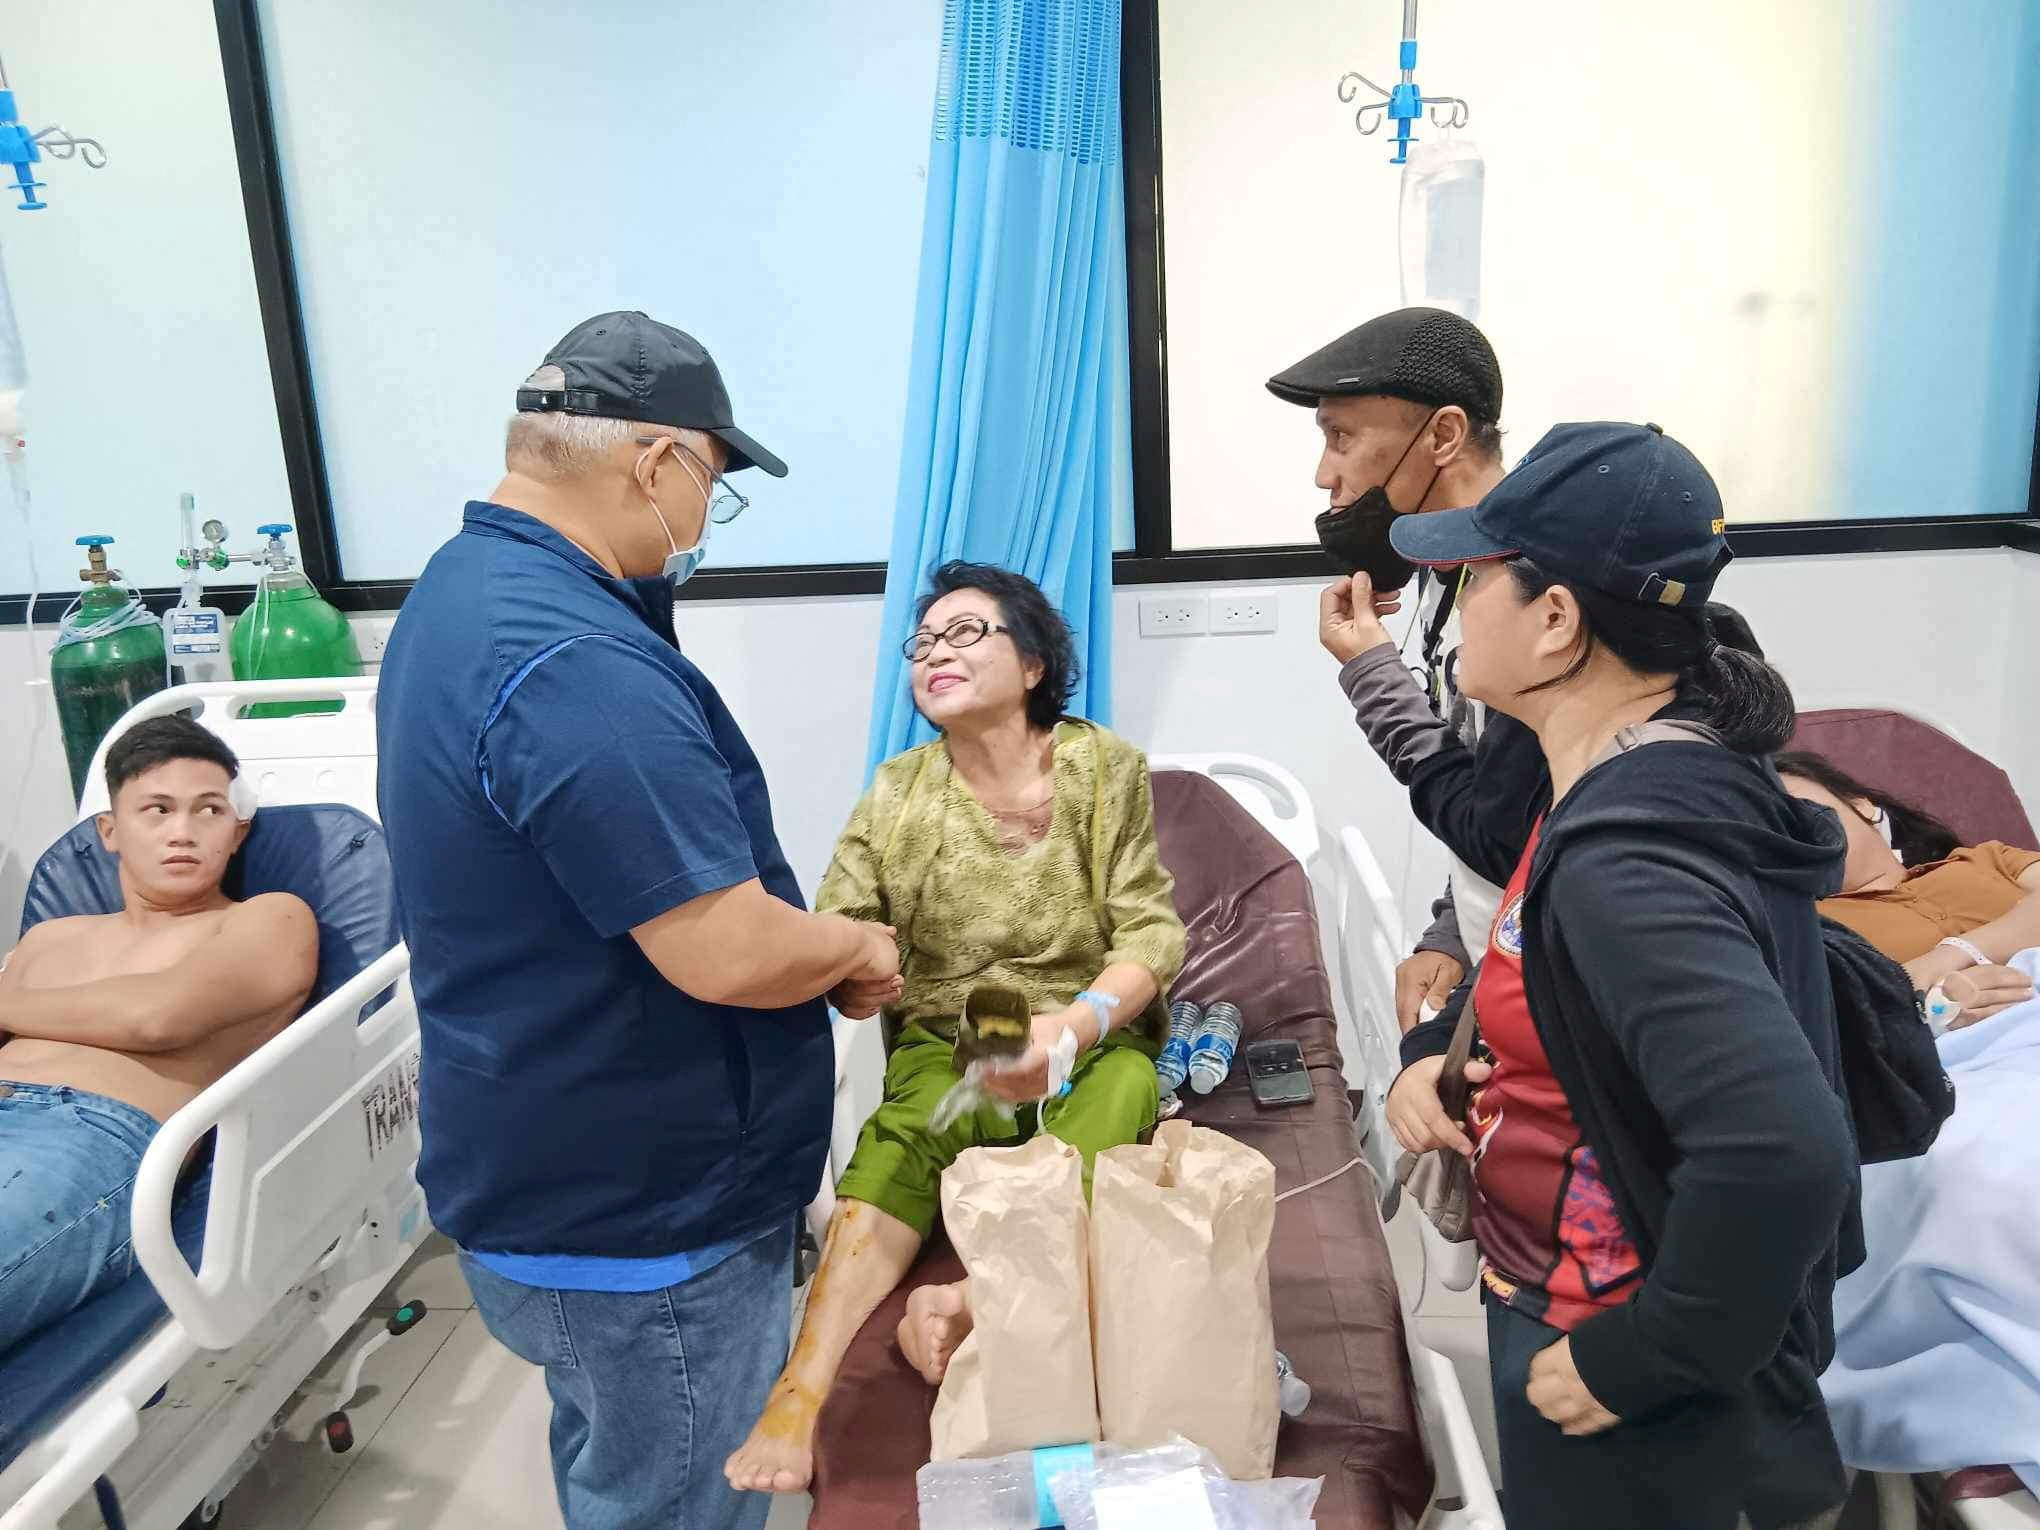 Lanao Del Sur Governor Mamintal Adiong Jr. visits the injured at a hospital following an explosion during a Catholic Mass in a gymnasium at Mindanao State University, in Marawi, Philippines, December 3, 2023. Lanao Del Sur Provincial Government/Handout via REUTERS